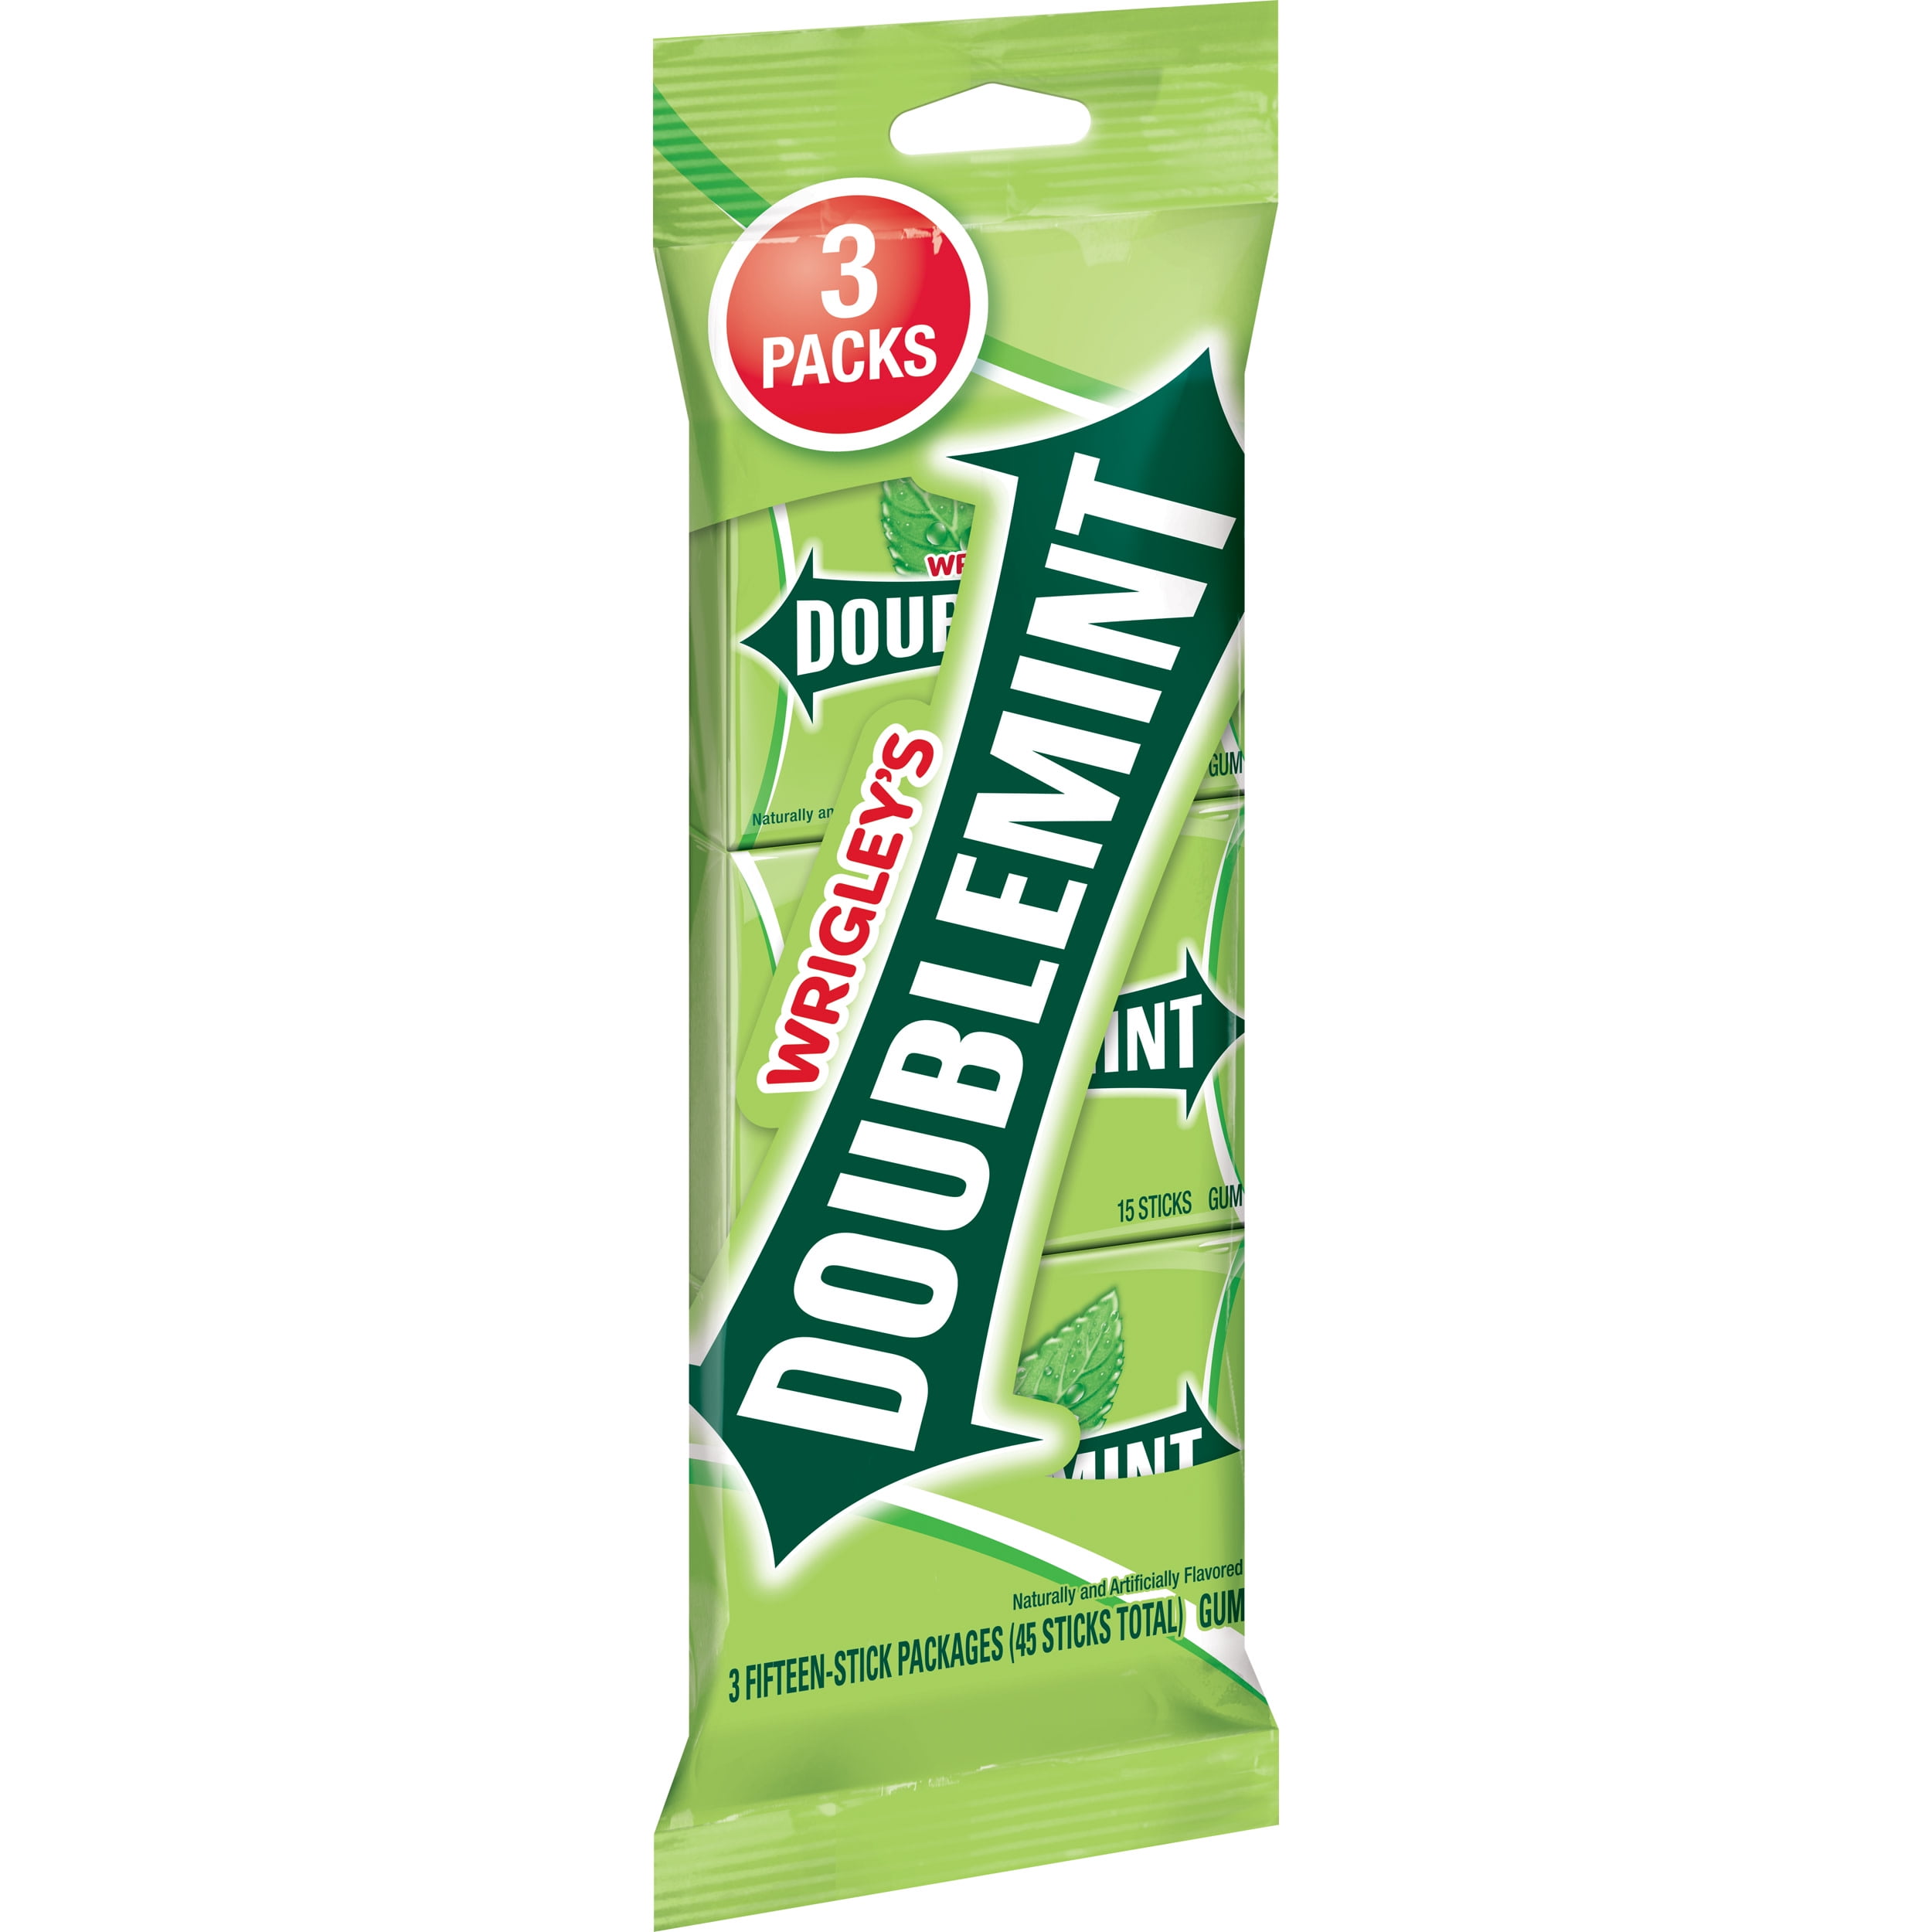 Wrigley's Doublemint Bulk Chewing Gum, Value Pack - 15 ct (3 Pack)